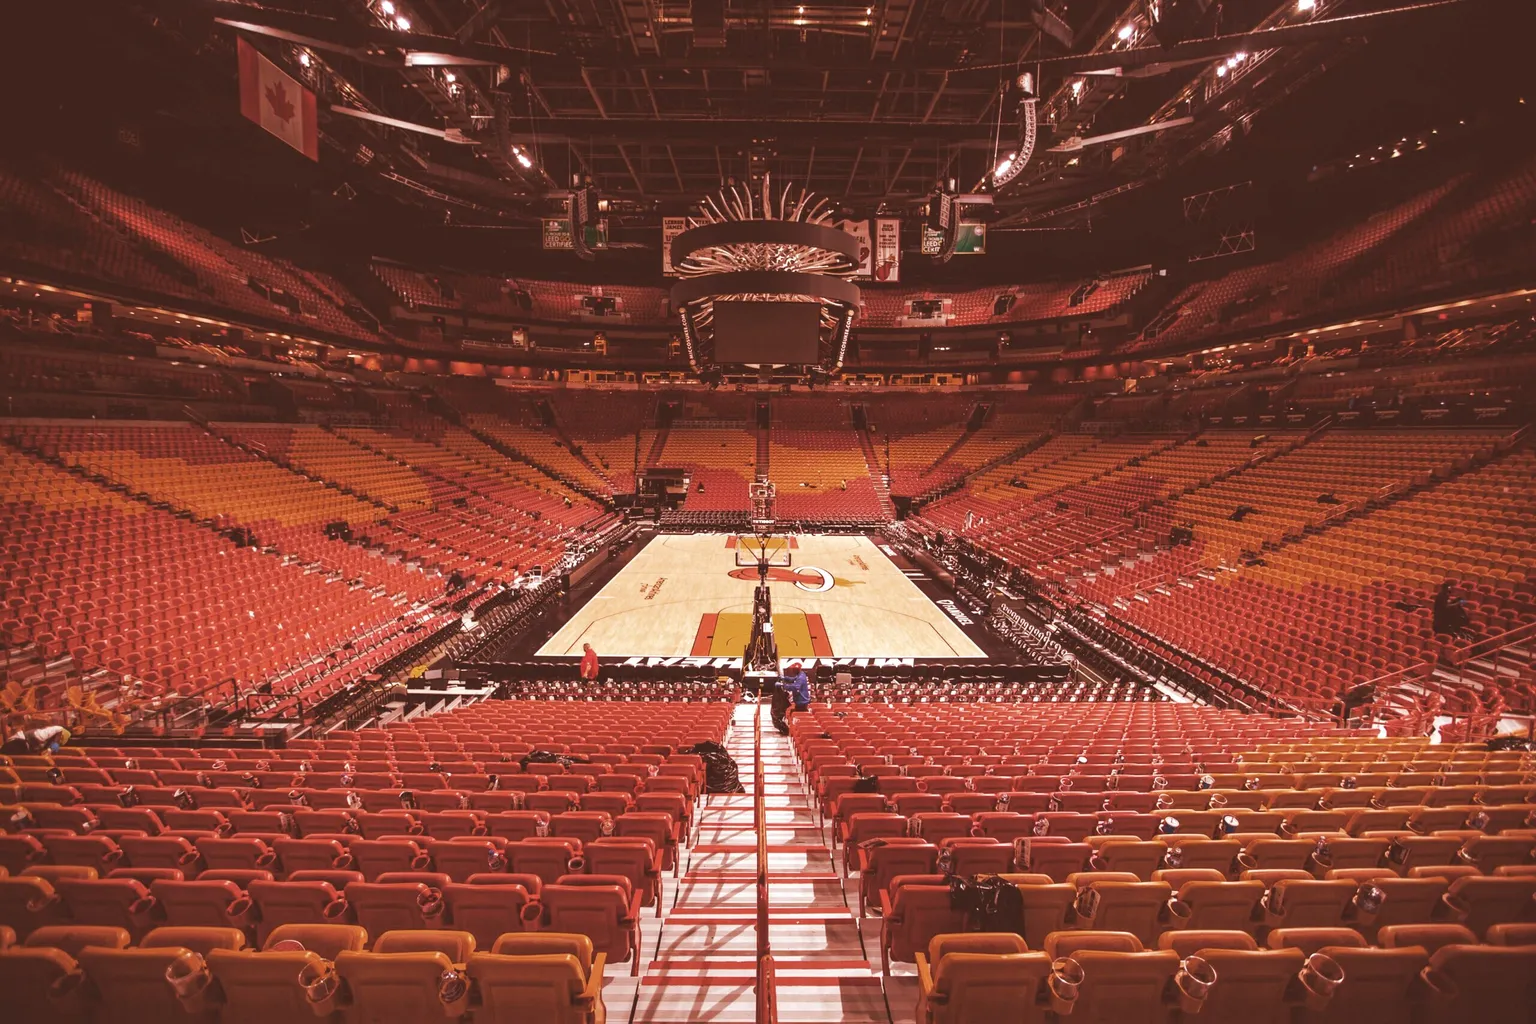 American Airline Arena after a Miami Heat basketball game on March 31, 2018. Image: Shutterstock